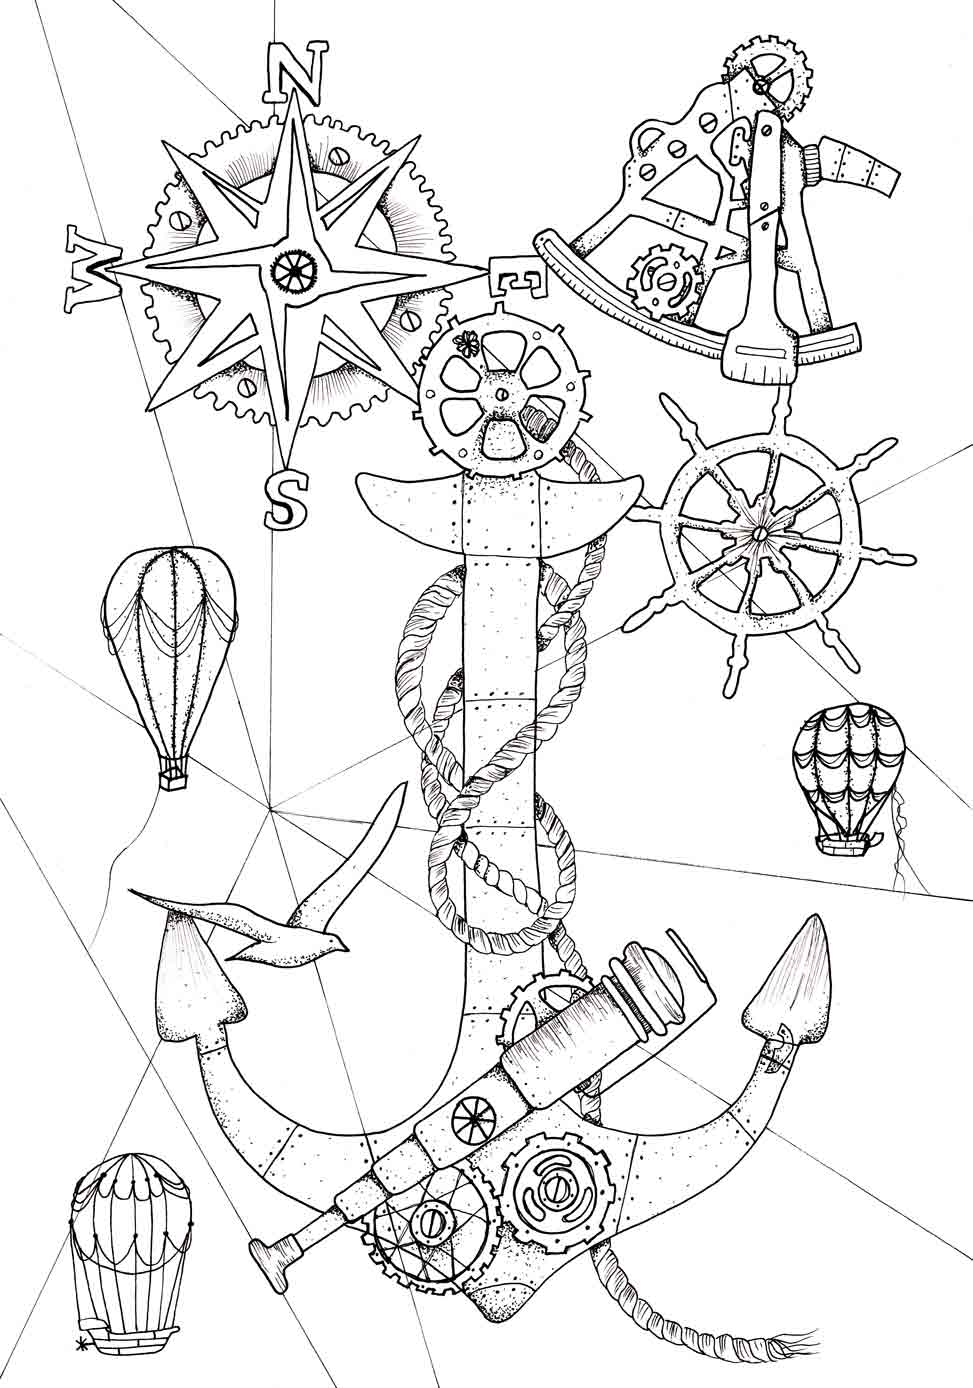 https://www.bluestarcoloring.com/wp-content/uploads/2016/11/steampunk-coloring-pages-2.jpg